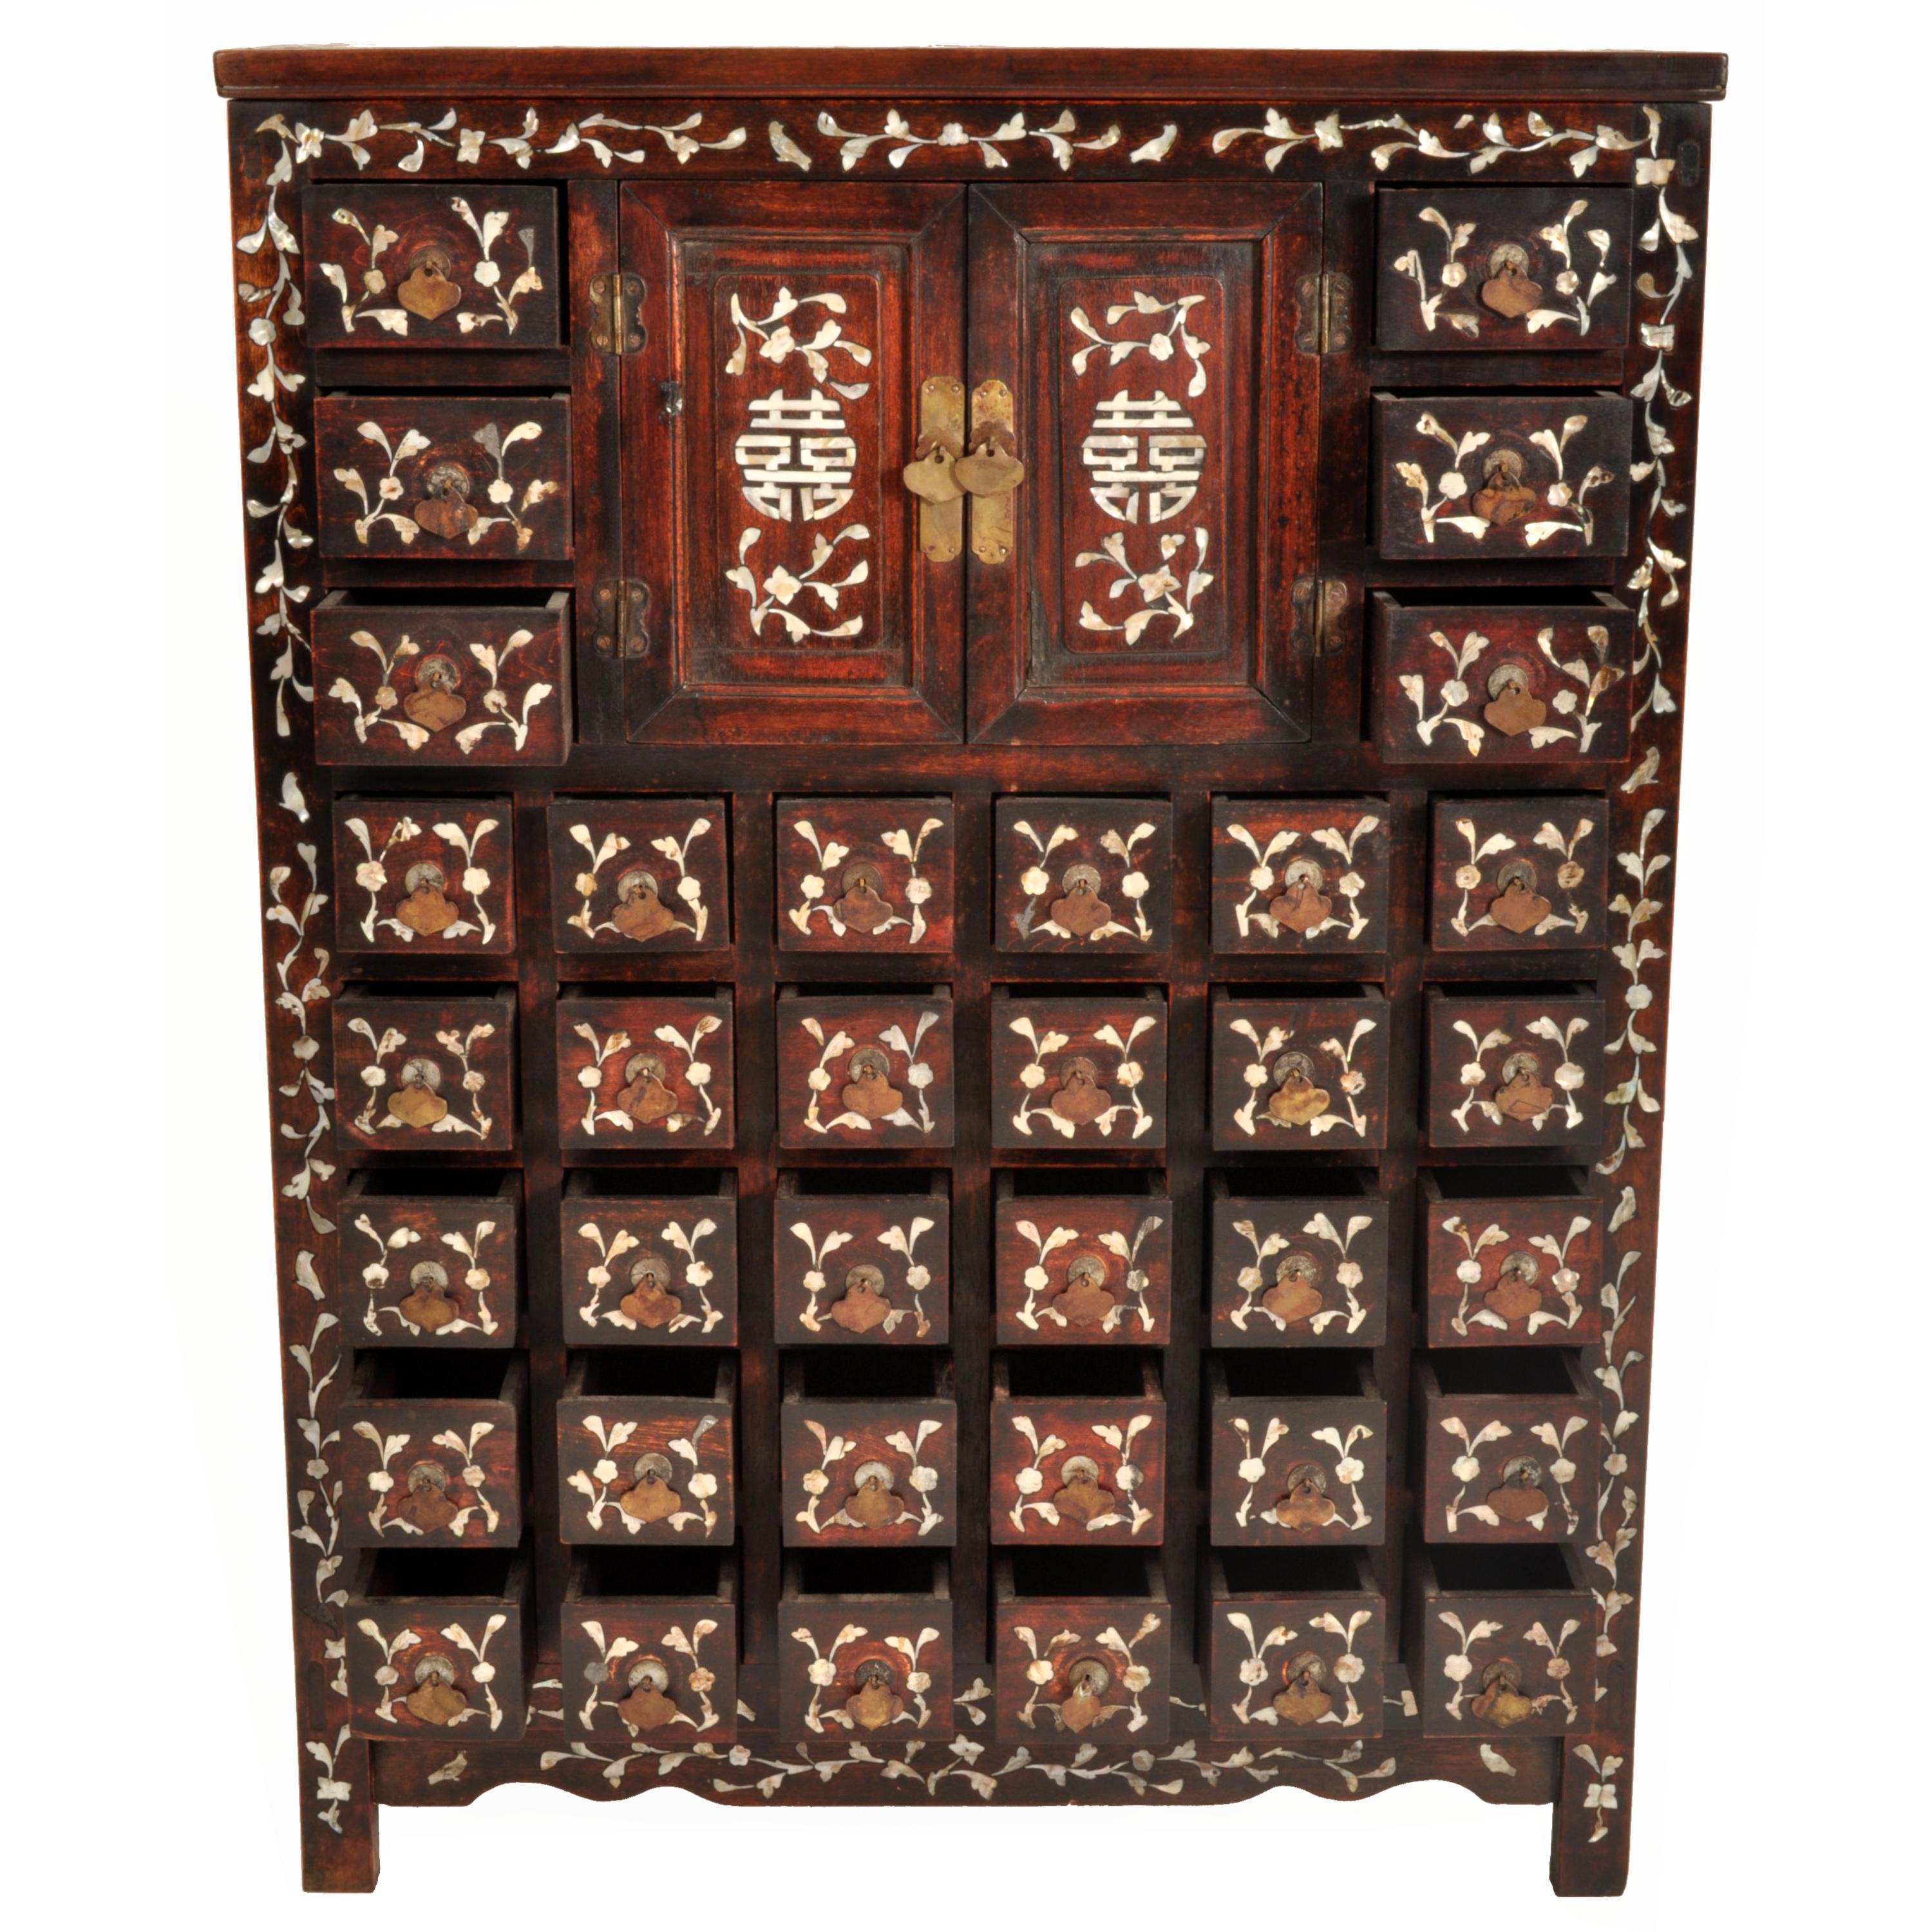 Inlay Antique Chinese Qing Rosewood Mother-of-Pearl Inlaid Apothecary Cabinet 1850